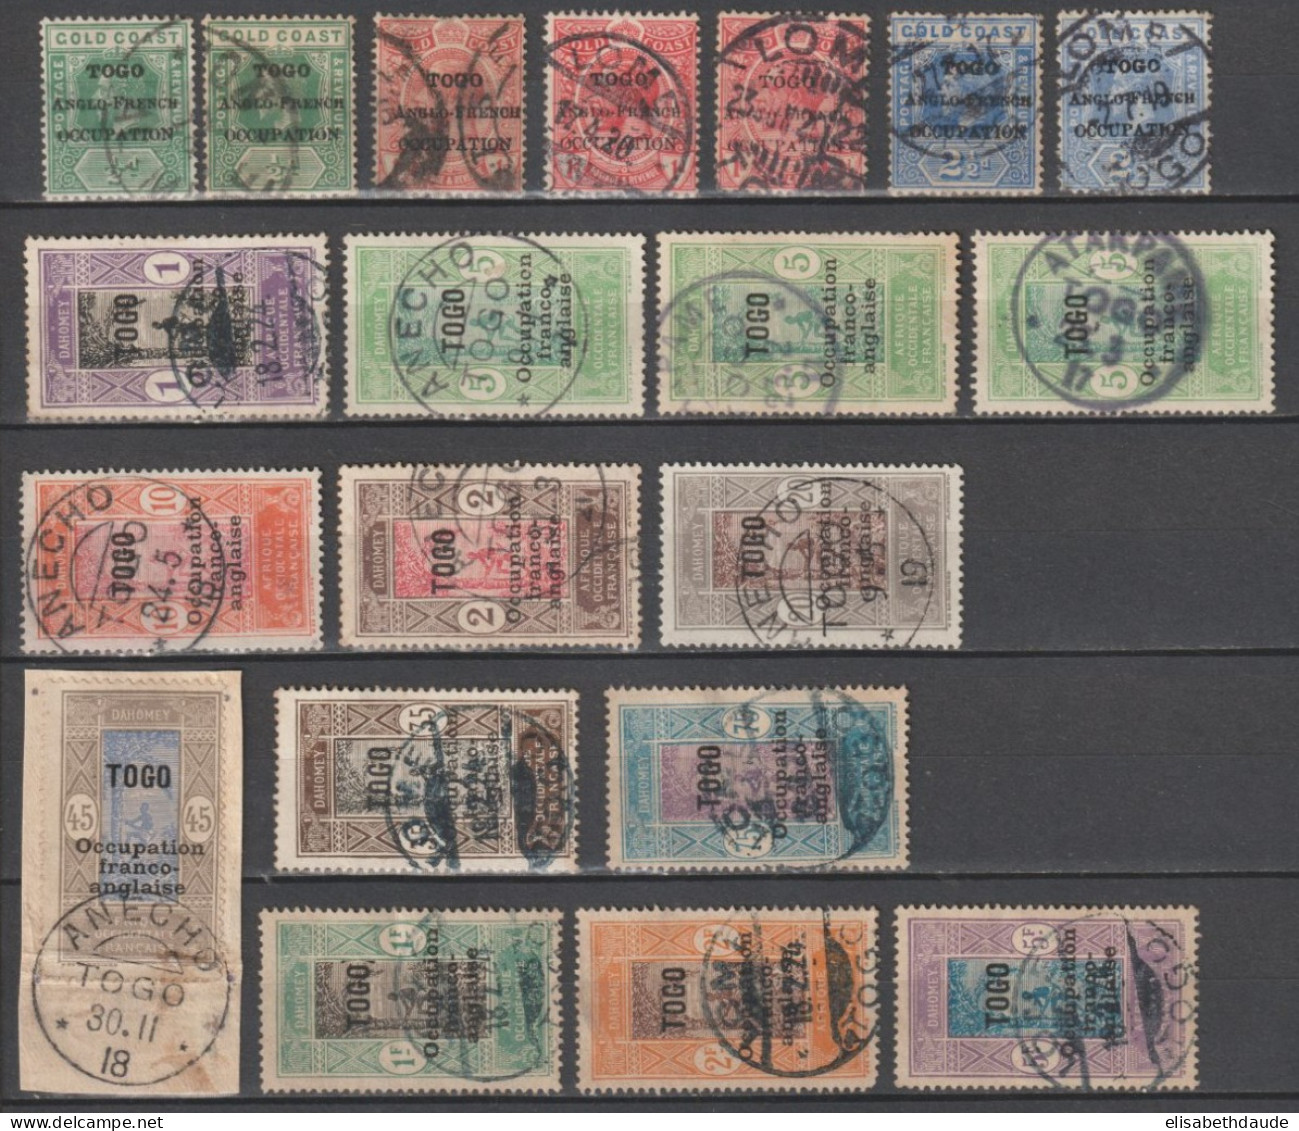 TOGO - 1914/1916 - BELLES OBLITERATIONS ALLEMANDES Sur TIMBRES OCCUPATION FRANCAISE DONT YVERT 98/100 ! - Used Stamps